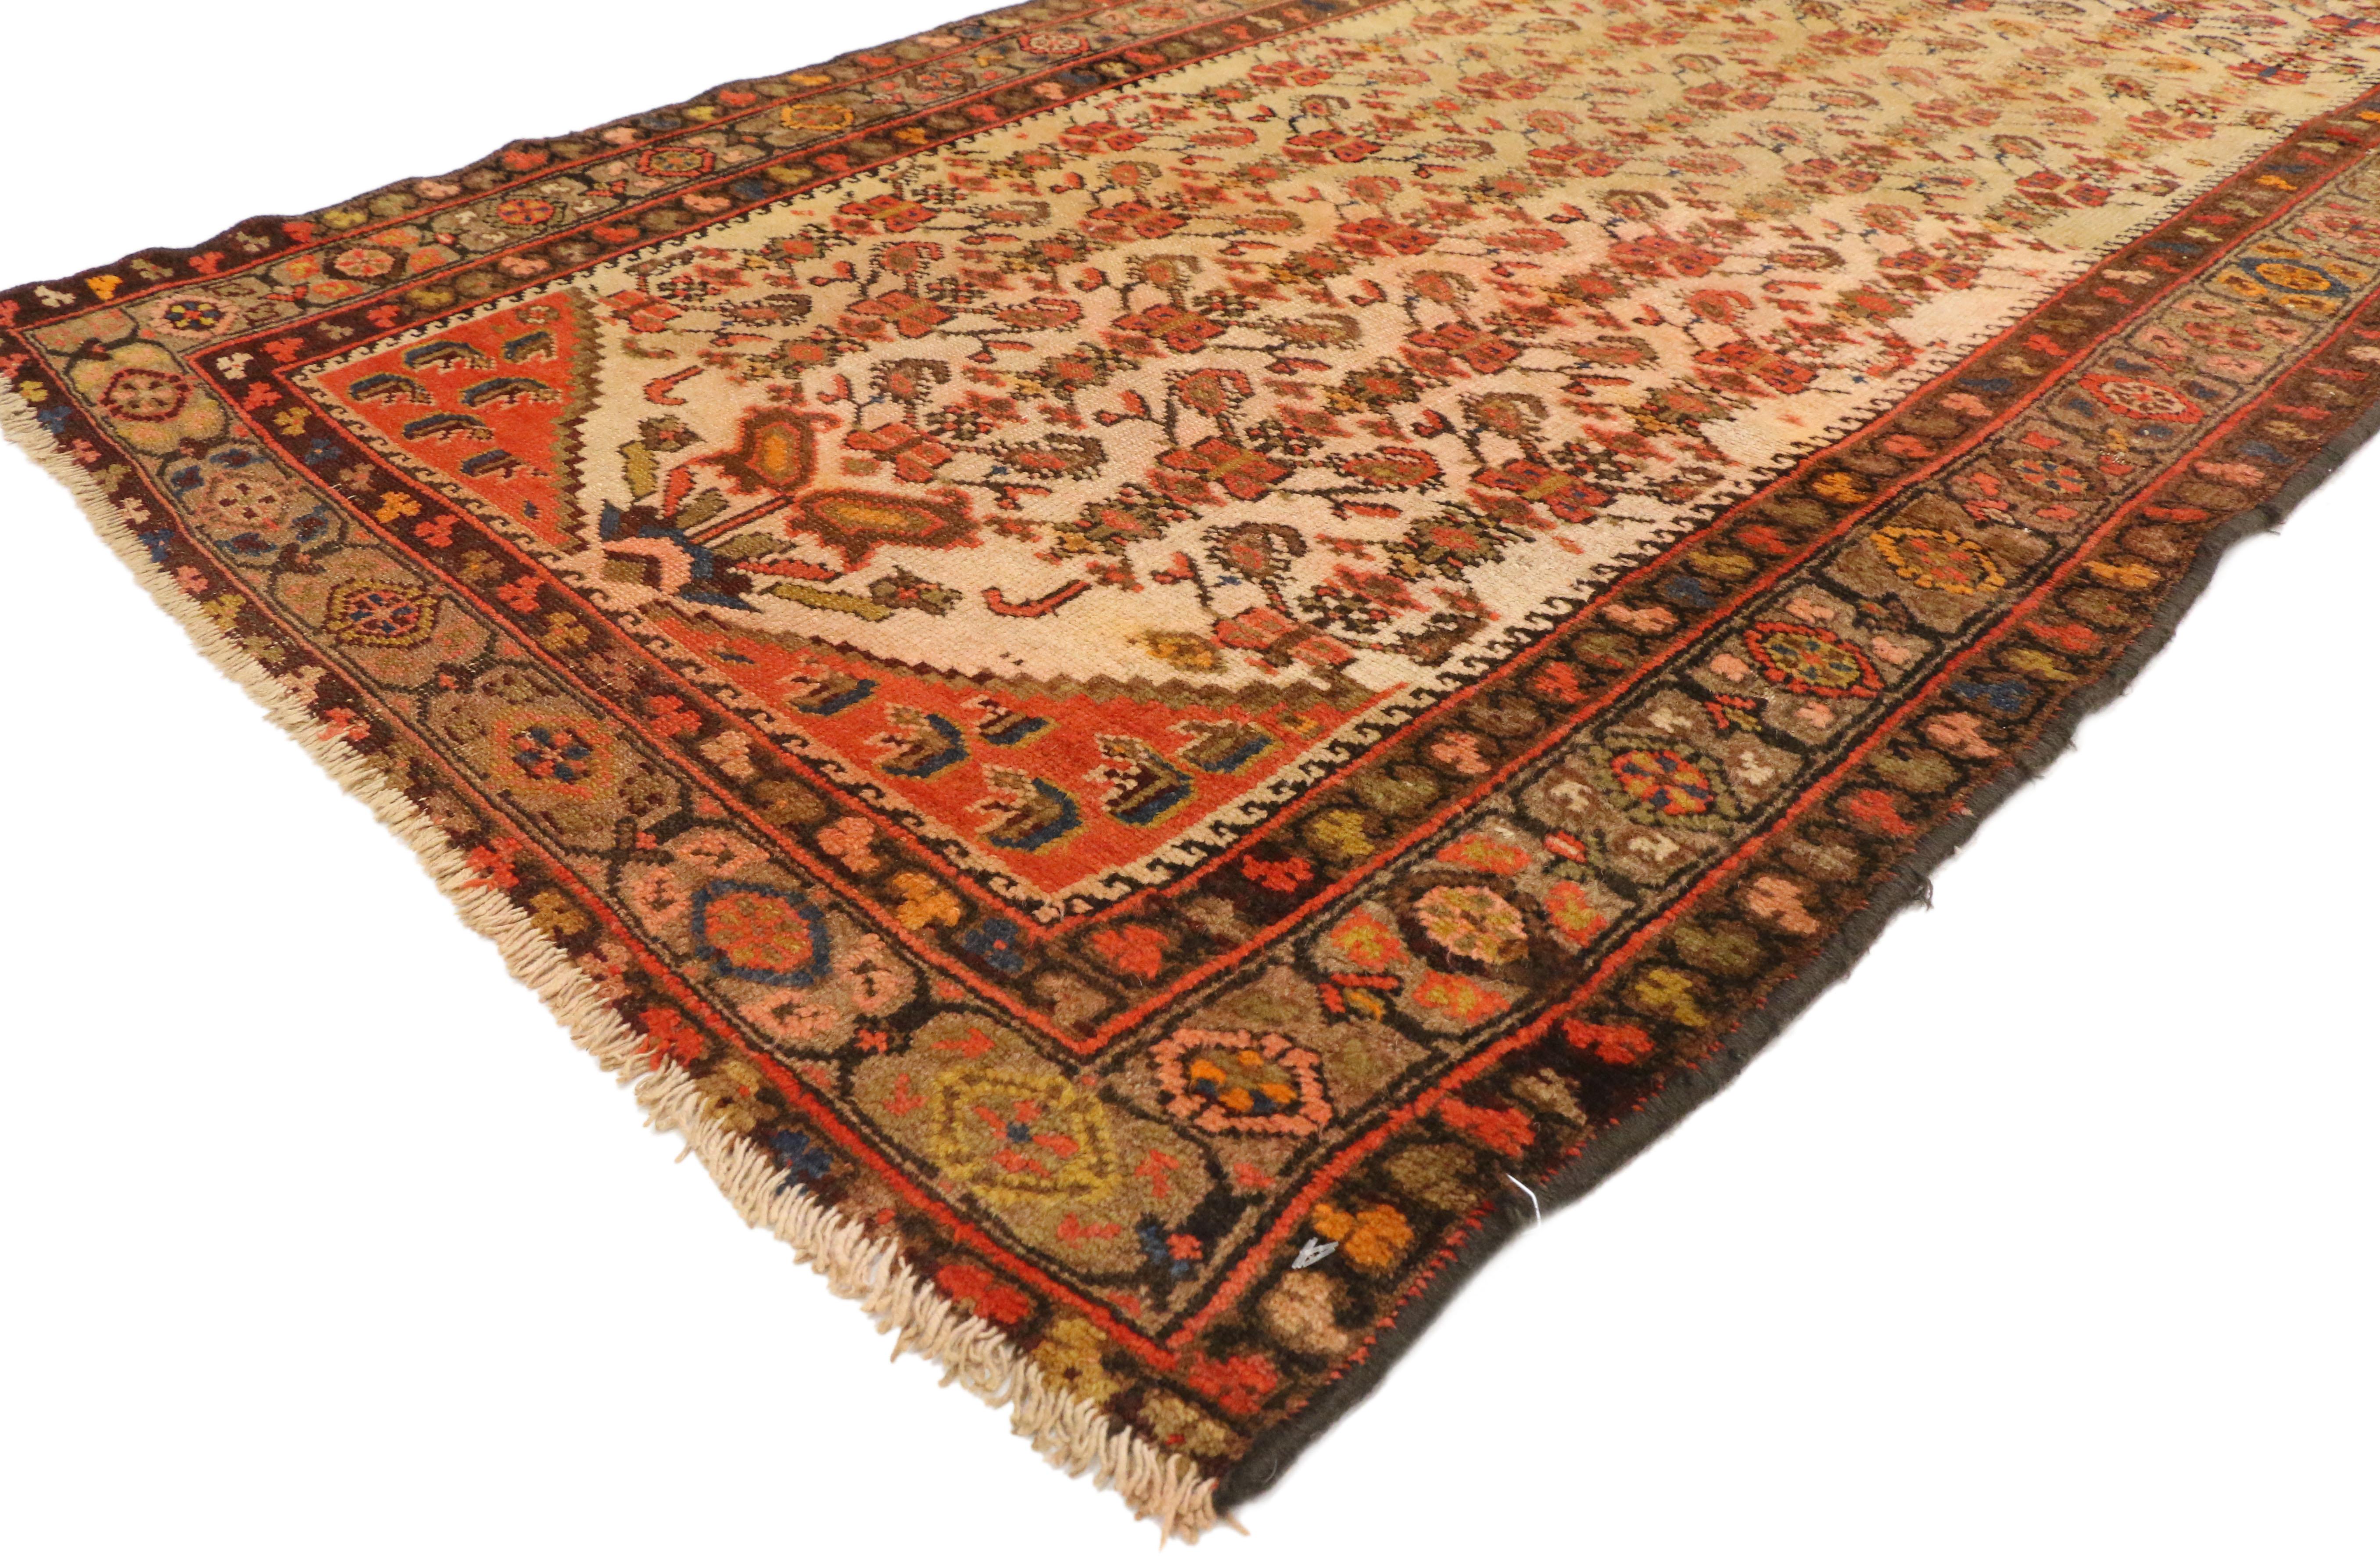 70740, Antique Persian Malayer Runner, Hallway Runner. This hand knotted wool antique Malayer runner features an all-over blooming Qashqai style boteh pattern like butterflies atop plant stems. This sumptuous example of Malayer weaving features all